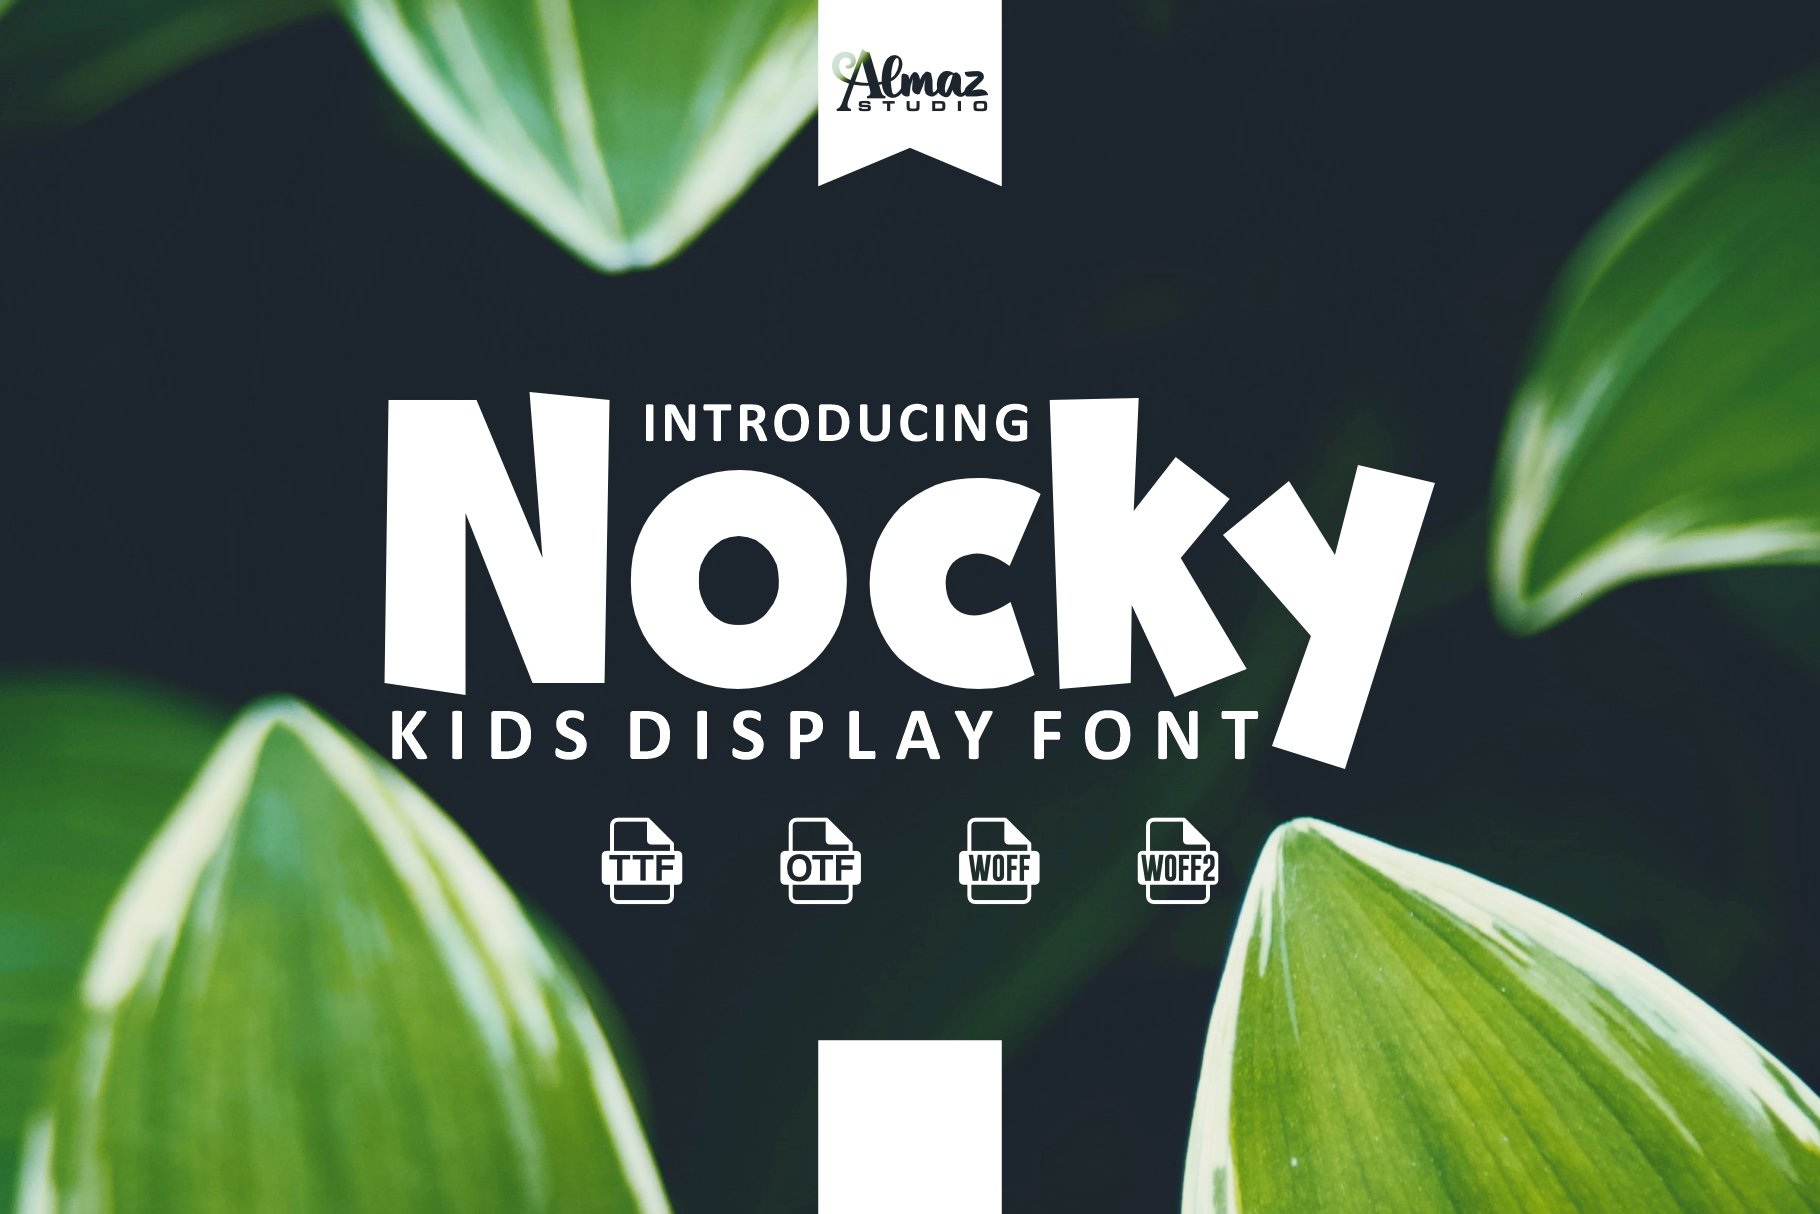 Nocky cover image.